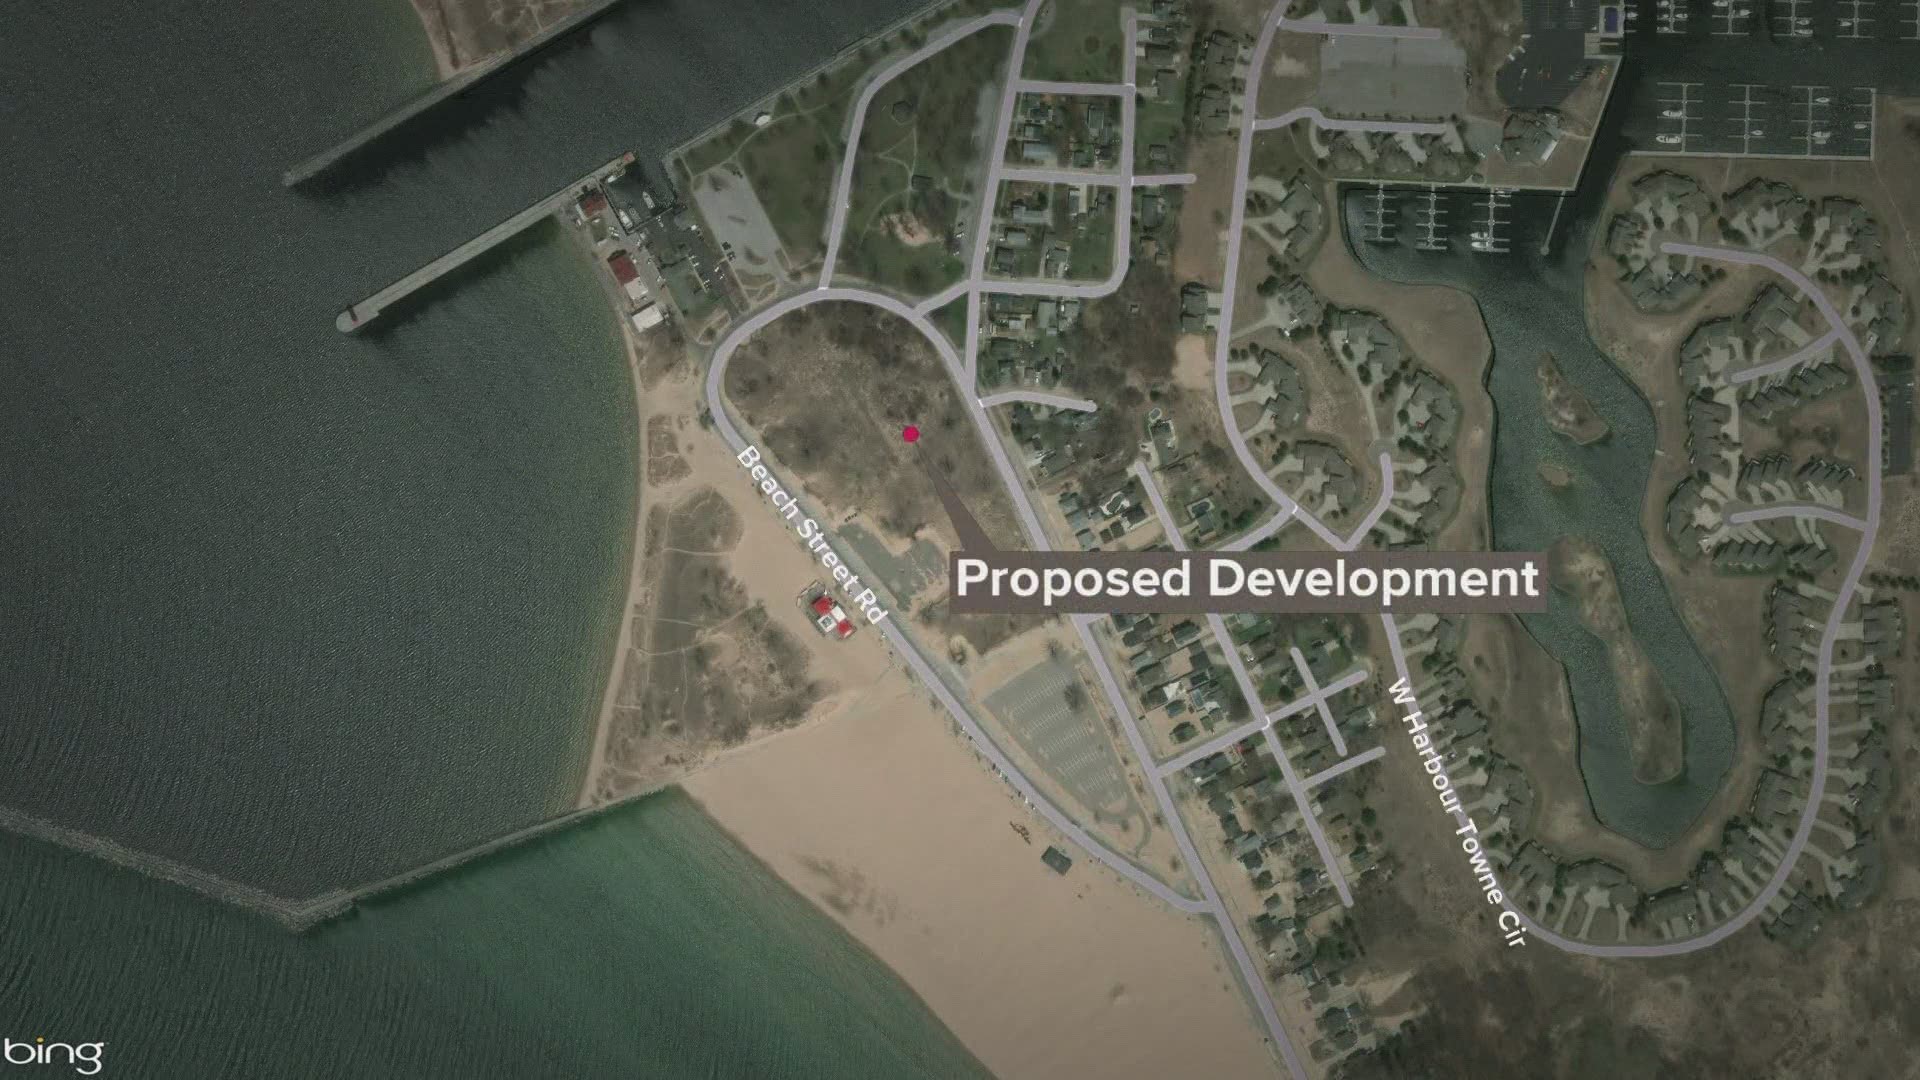 A proposed development calling for five seasonal cottages, each containing four separate units to be built at "the ovals" moved to Feb. 8 commission work session.